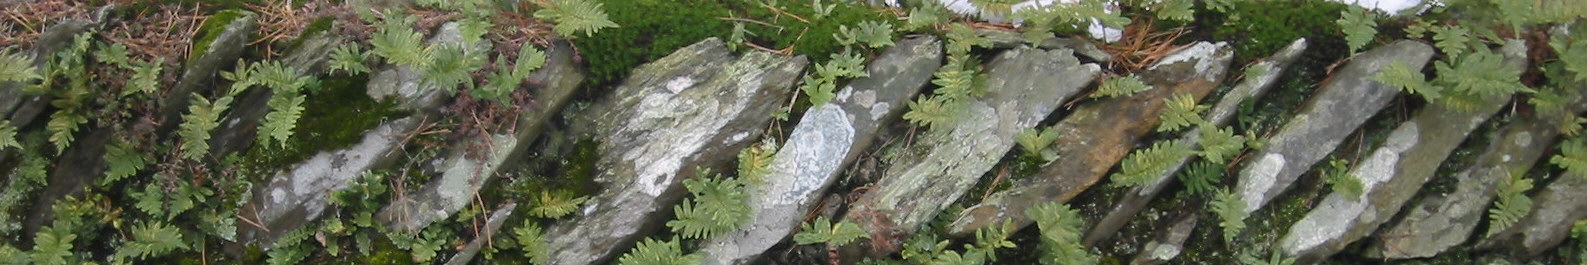 Grasmere wall with ferns thin 2